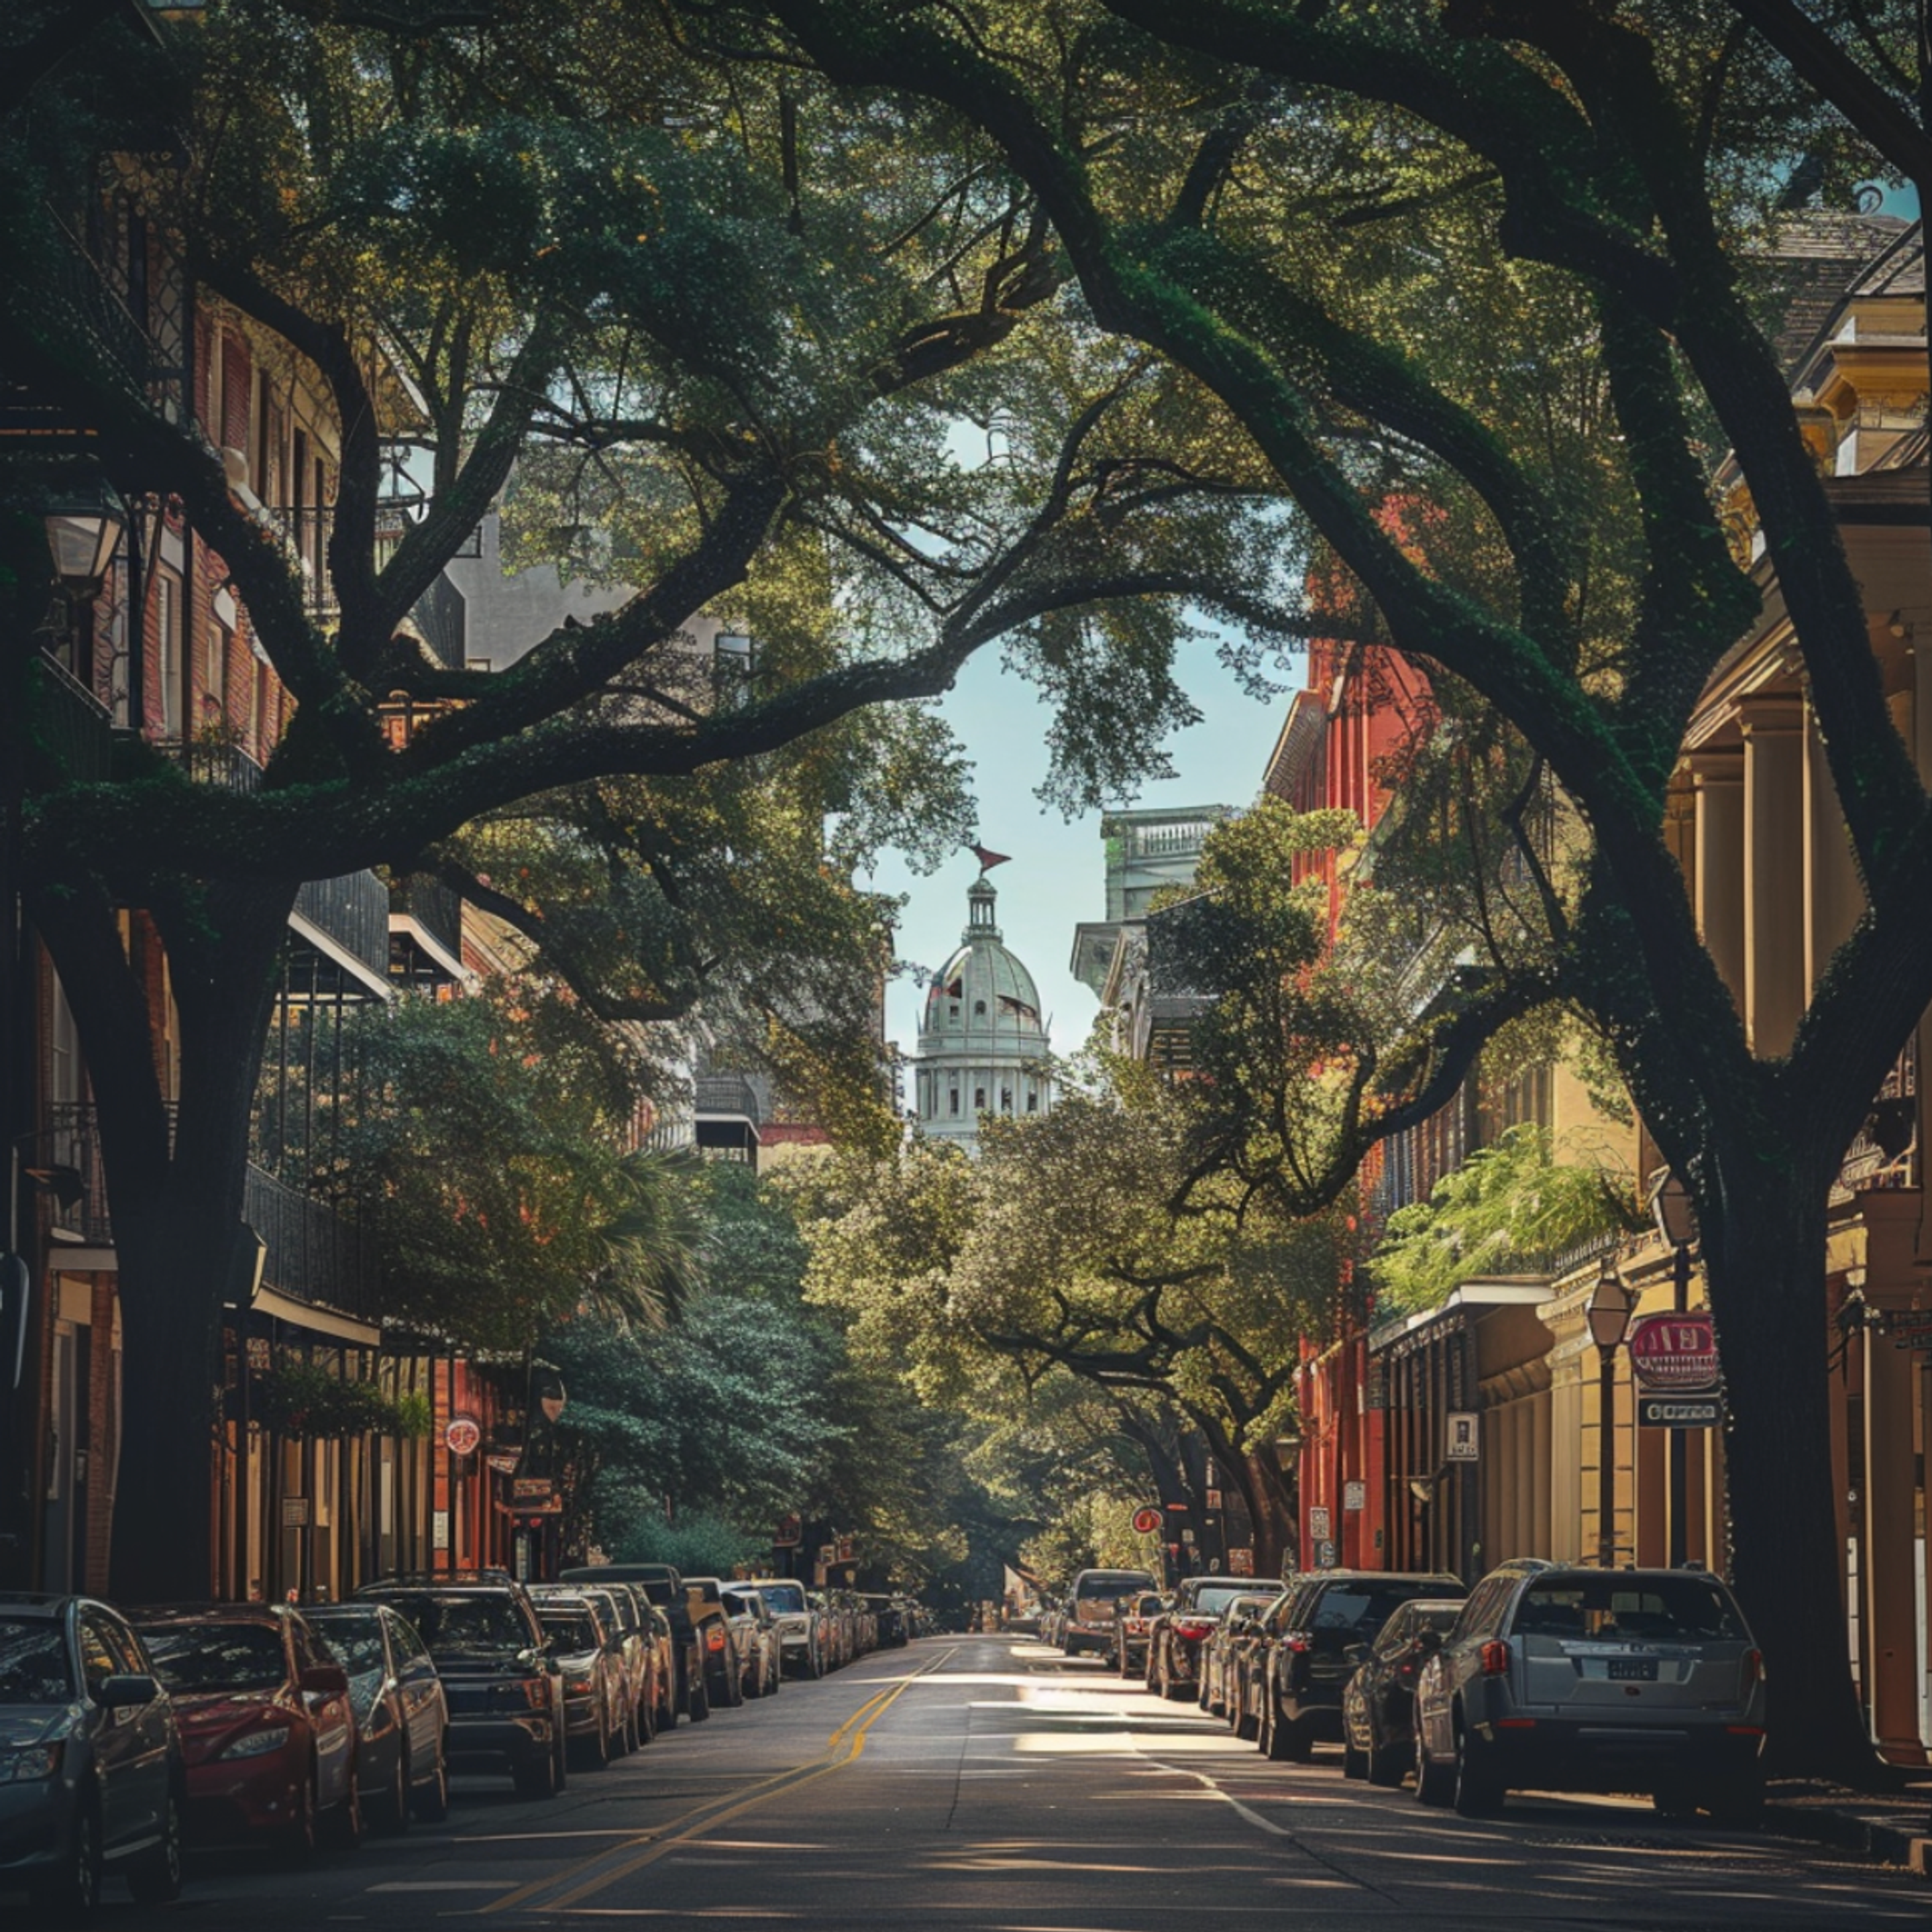 A tranquil street in New Orleans, Louisiana, shaded by majestic live oaks, with the historic and ornate architecture of the city's buildings leading to the distant Louisiana State Capitol building, encapsulating the city's rich history and charming atmosphere.